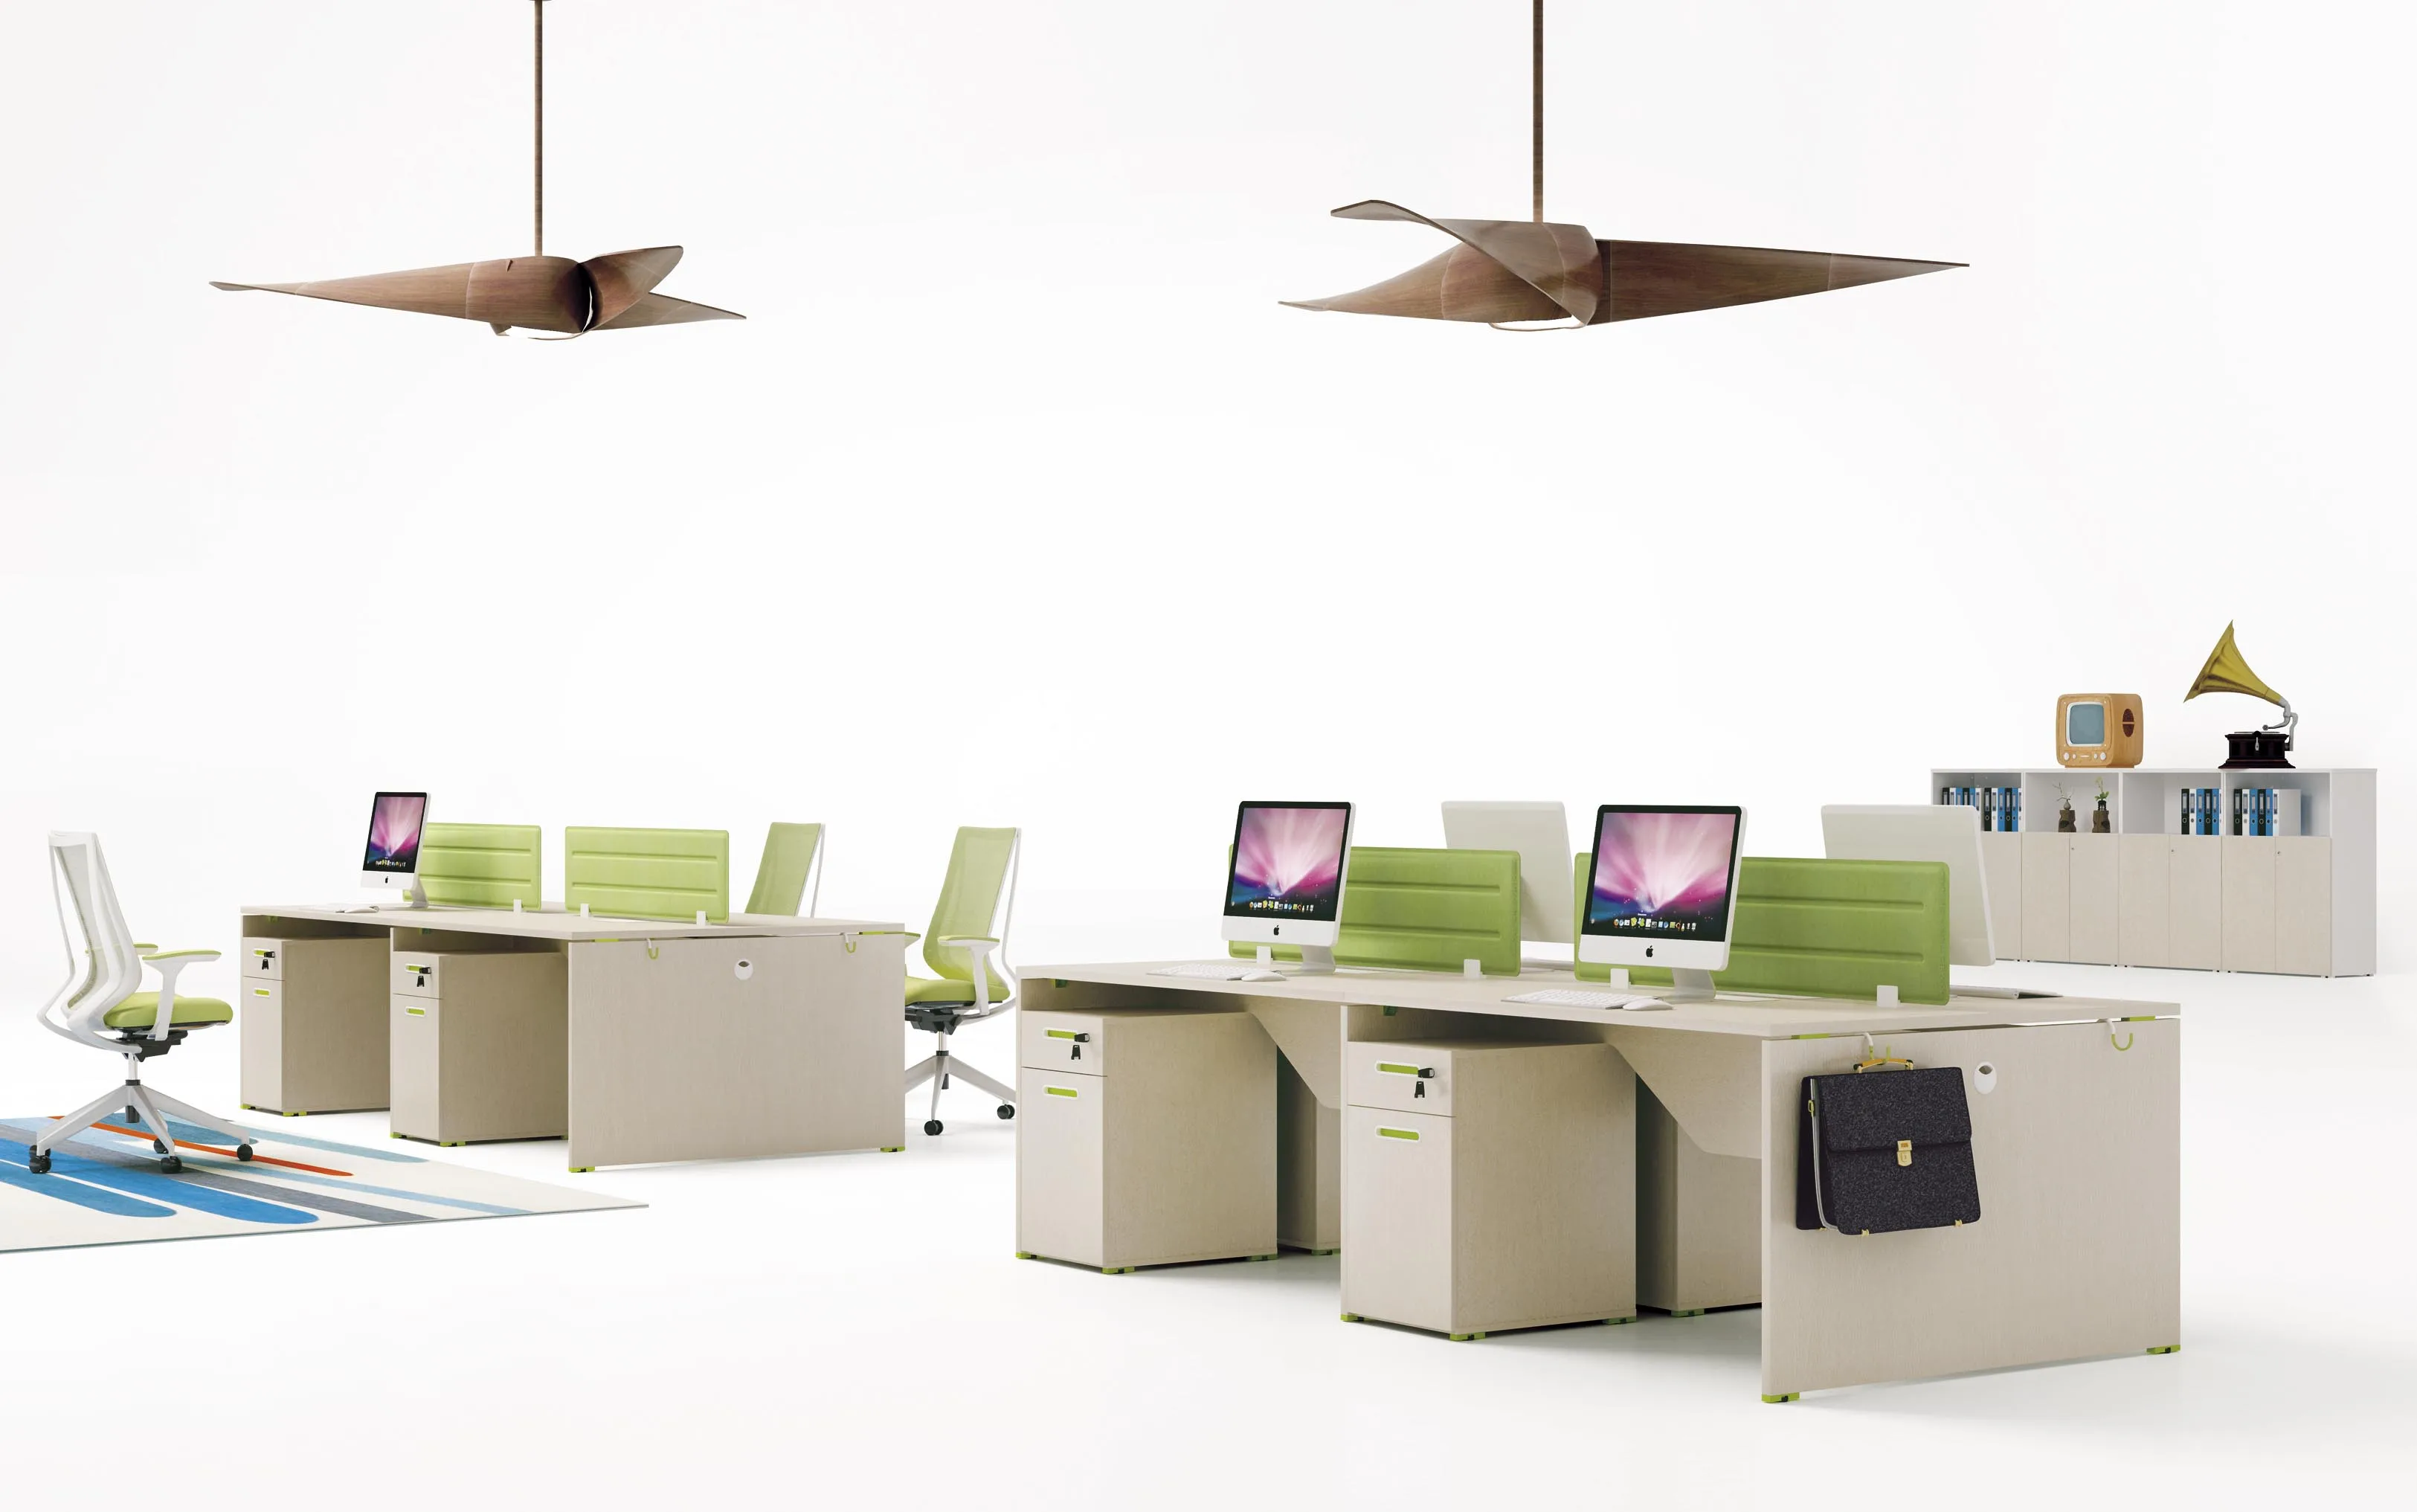 CHINA factory offer office commercial furniture interior design